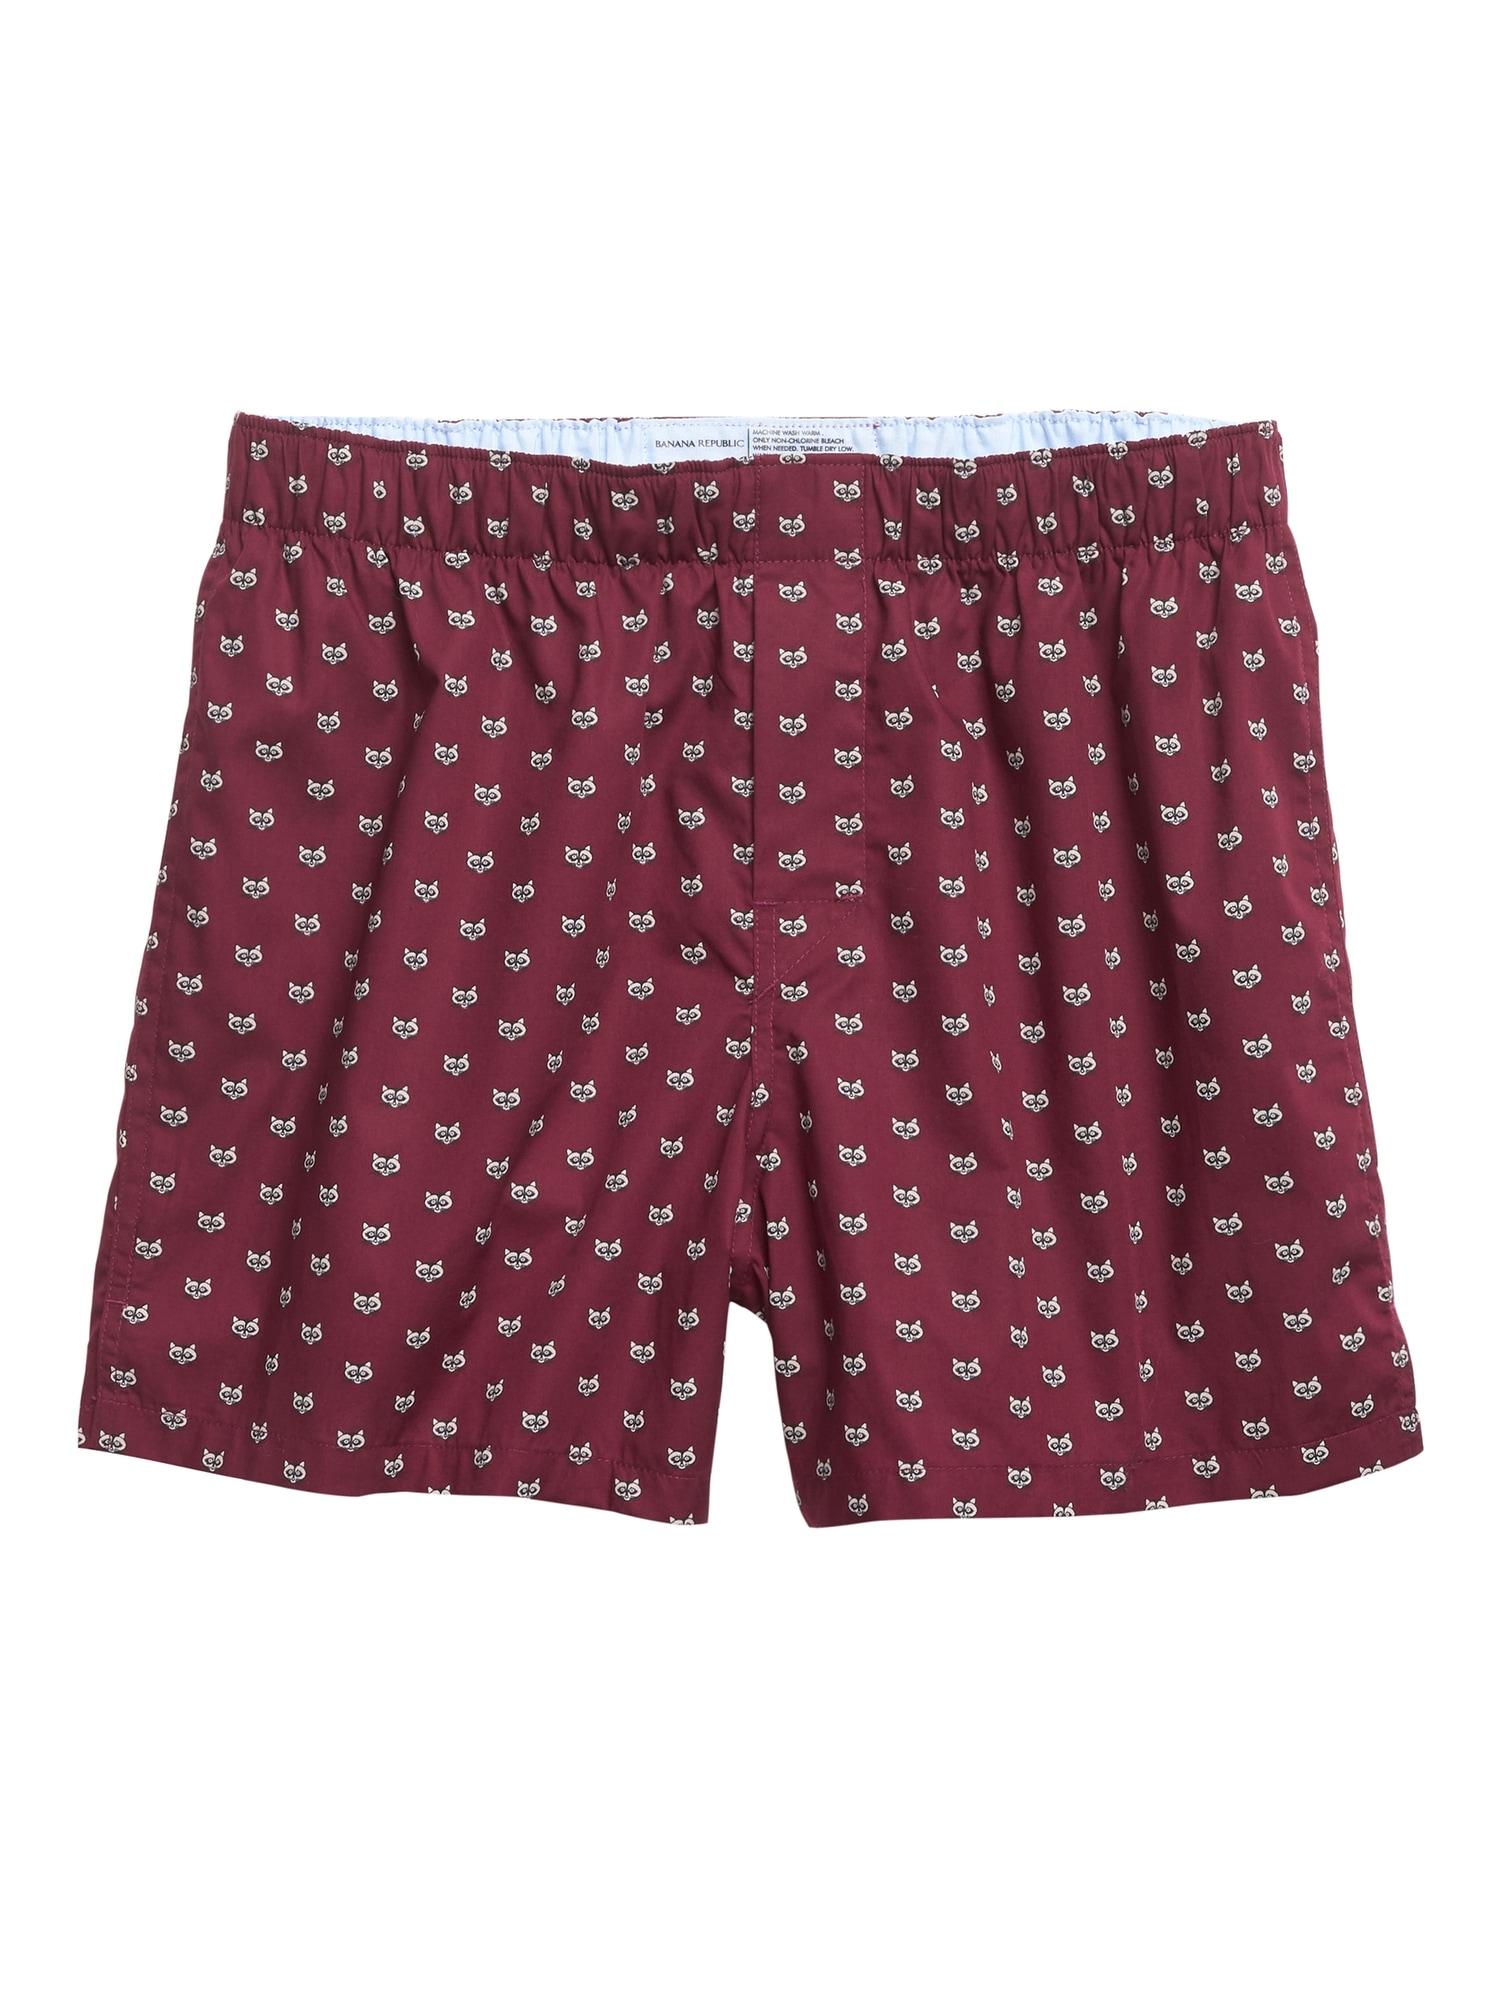 Banana Republic Cotton Raccoon Boxer in Burgundy Red (Red) for Men - Lyst